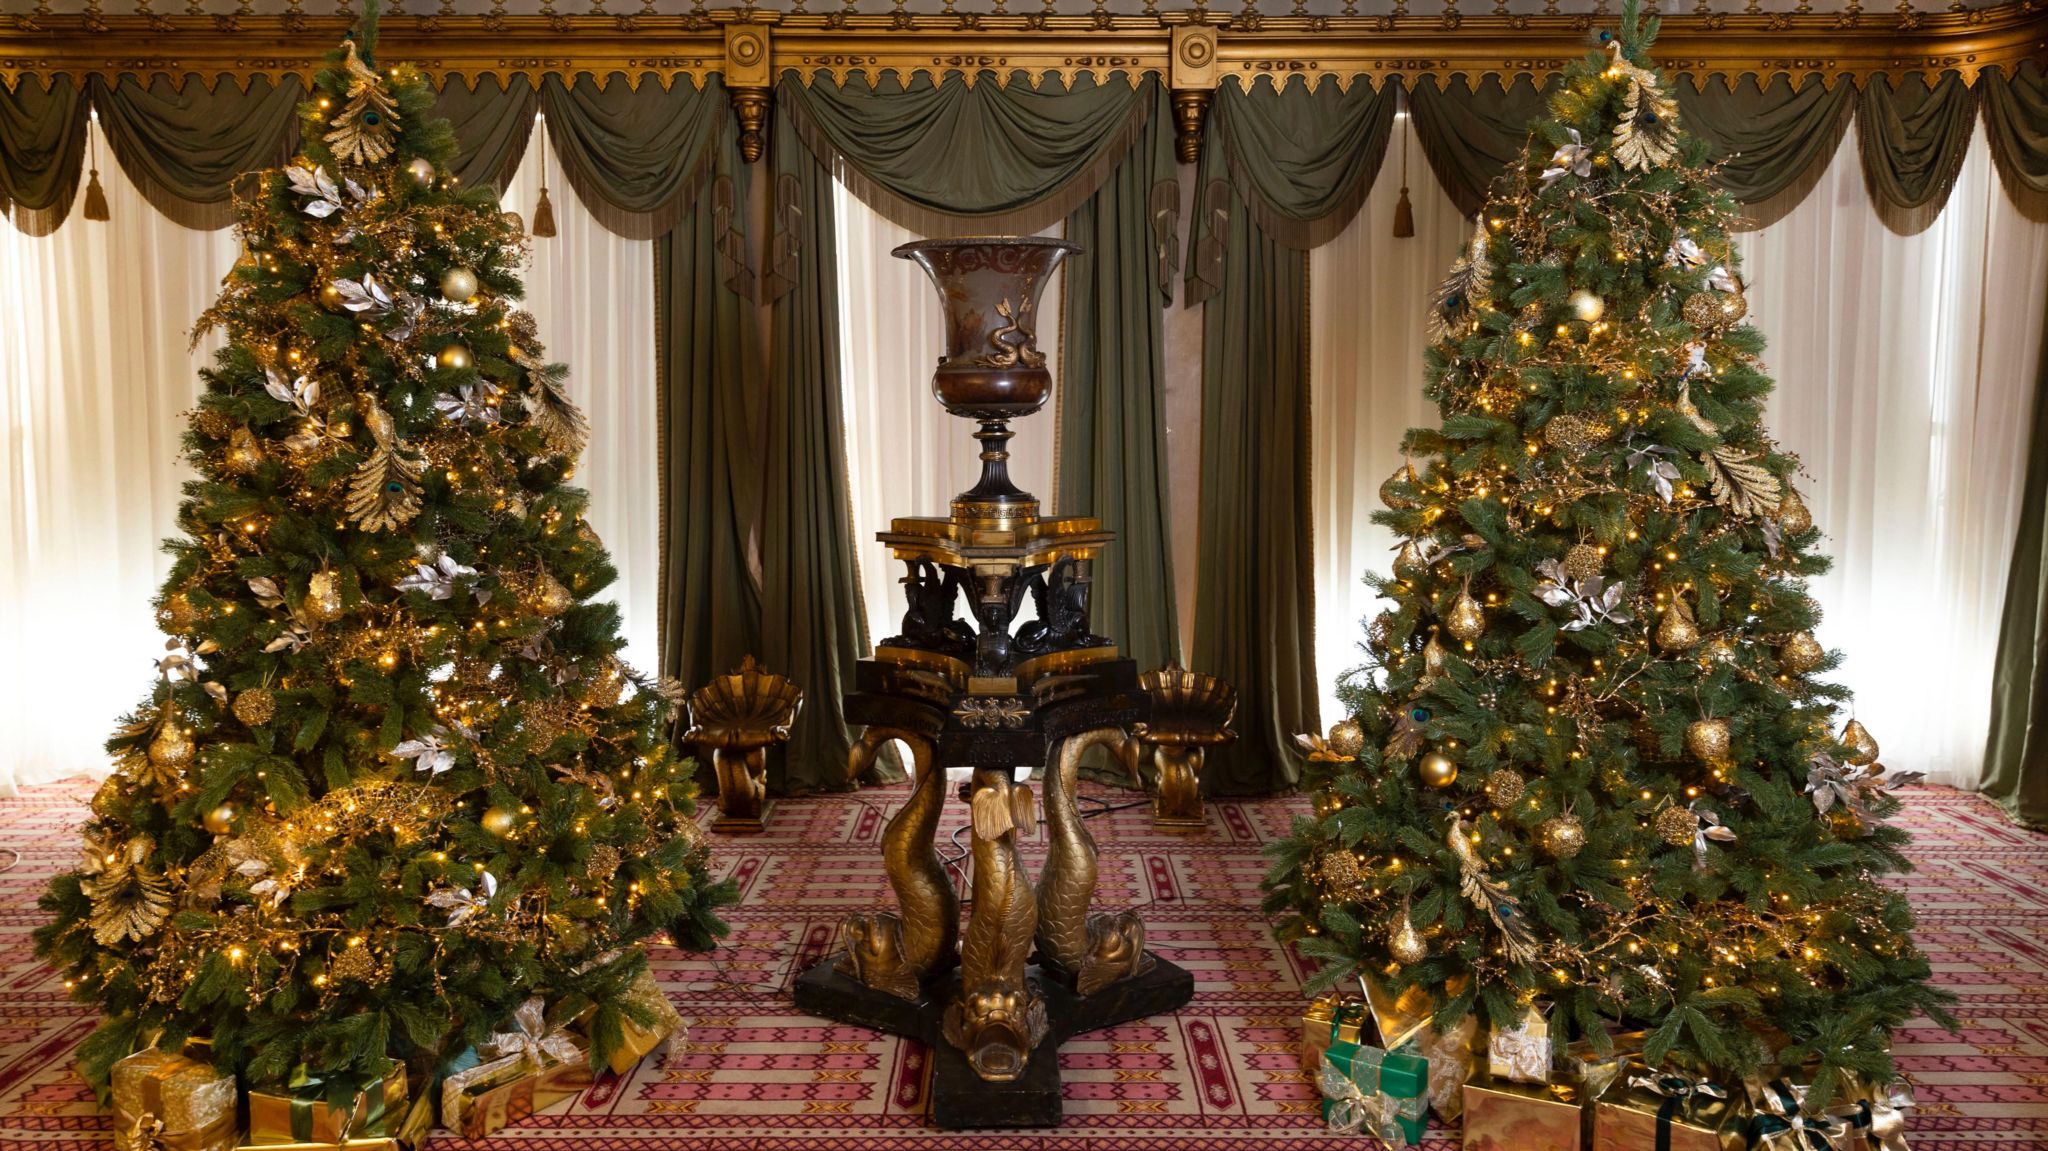 Two Christmas trees next to each other covered in golden lights and decorations, and a black and gold ornament in the middle of them